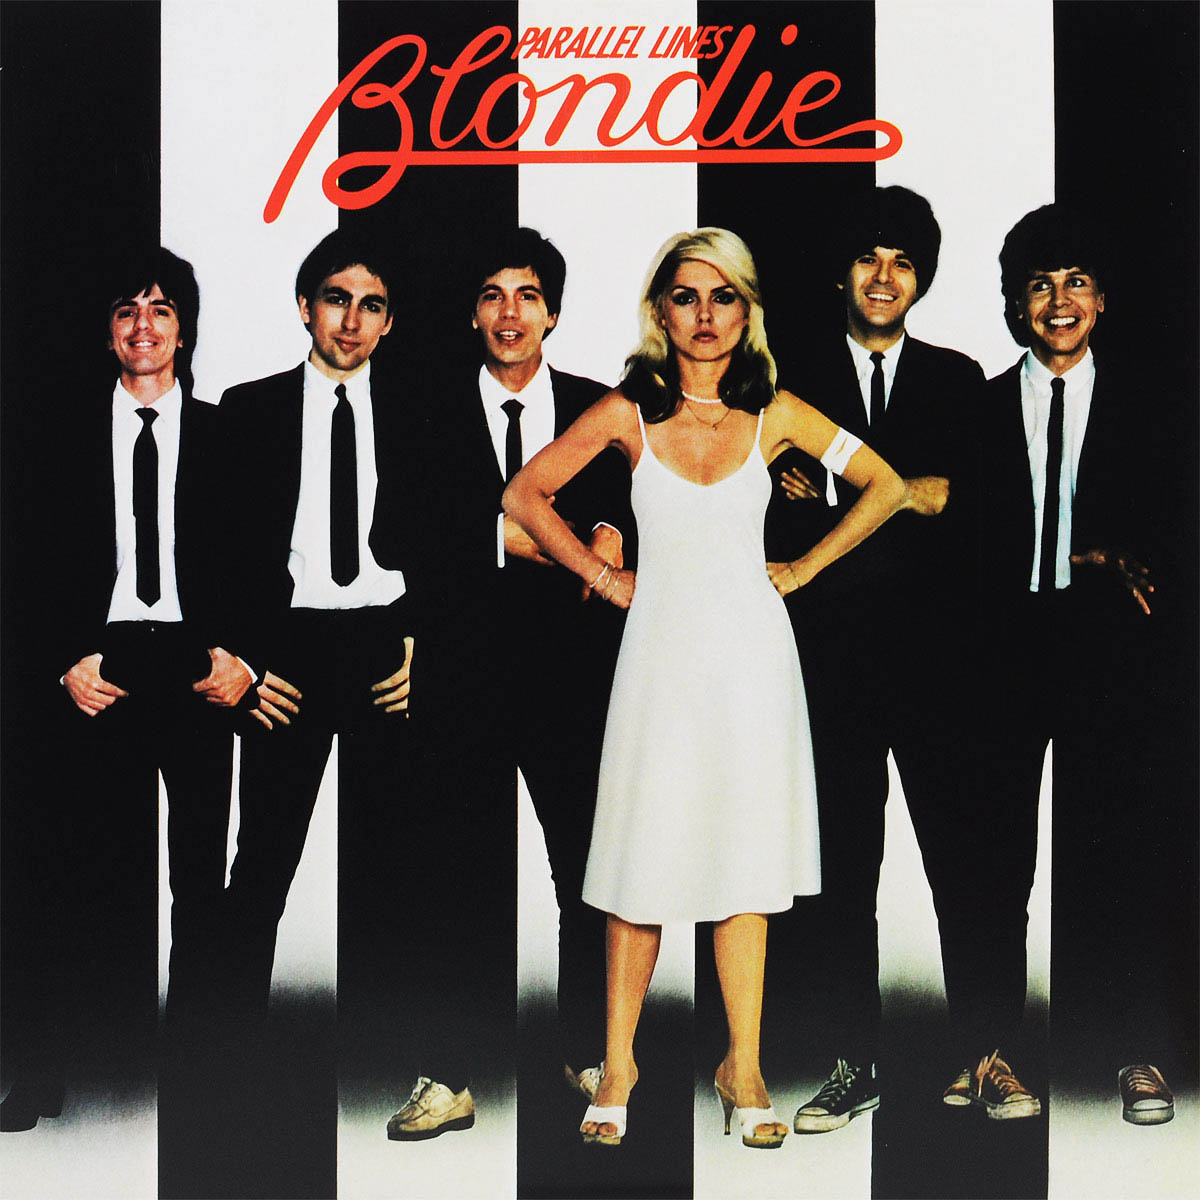 Cover of the album "Blondie" "Parallel Lines" (1978)